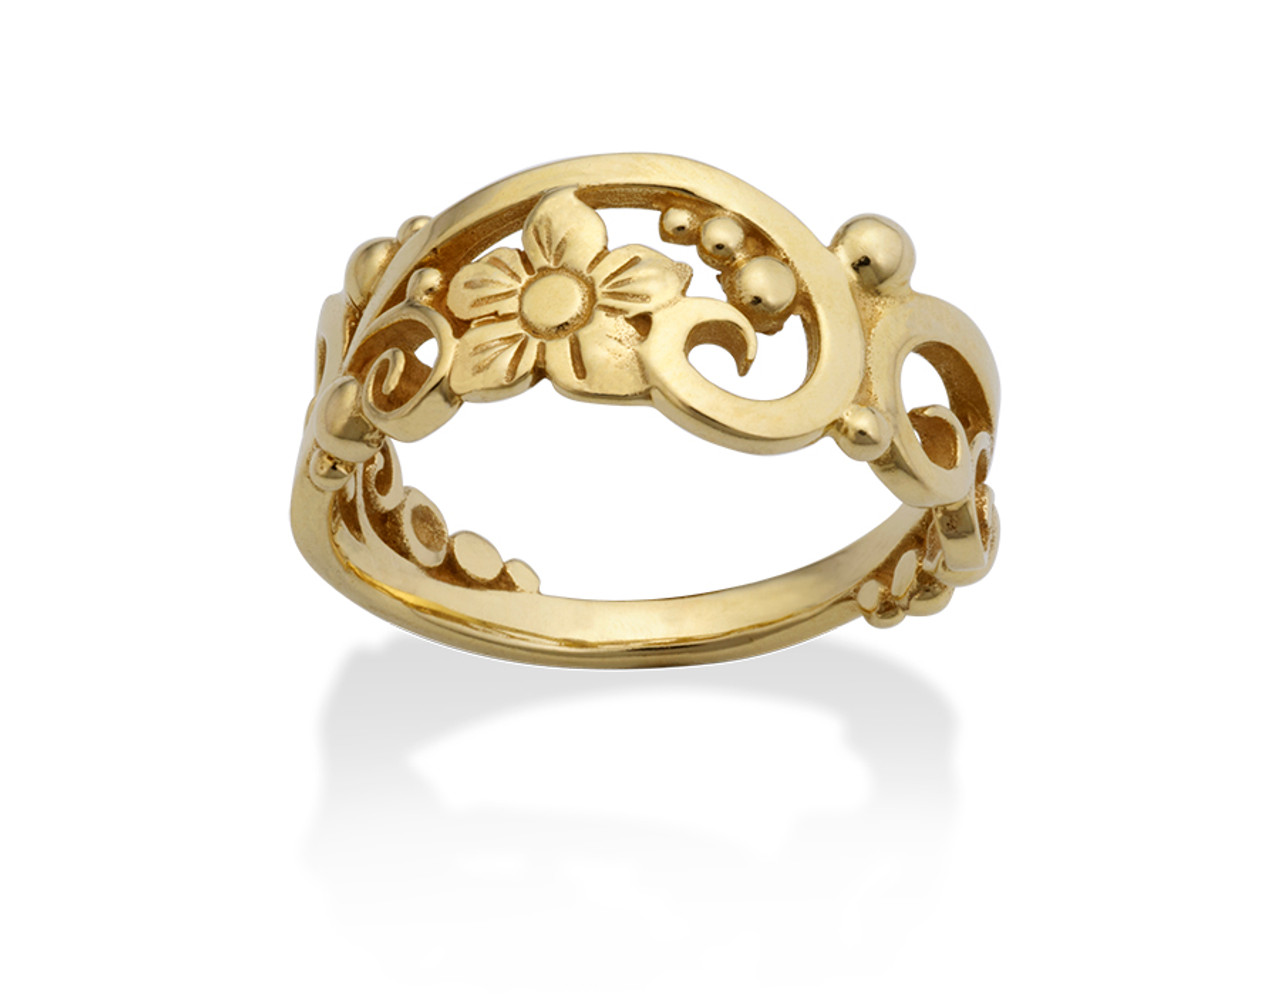 The Glorious Floral Ring | BlueStone.com